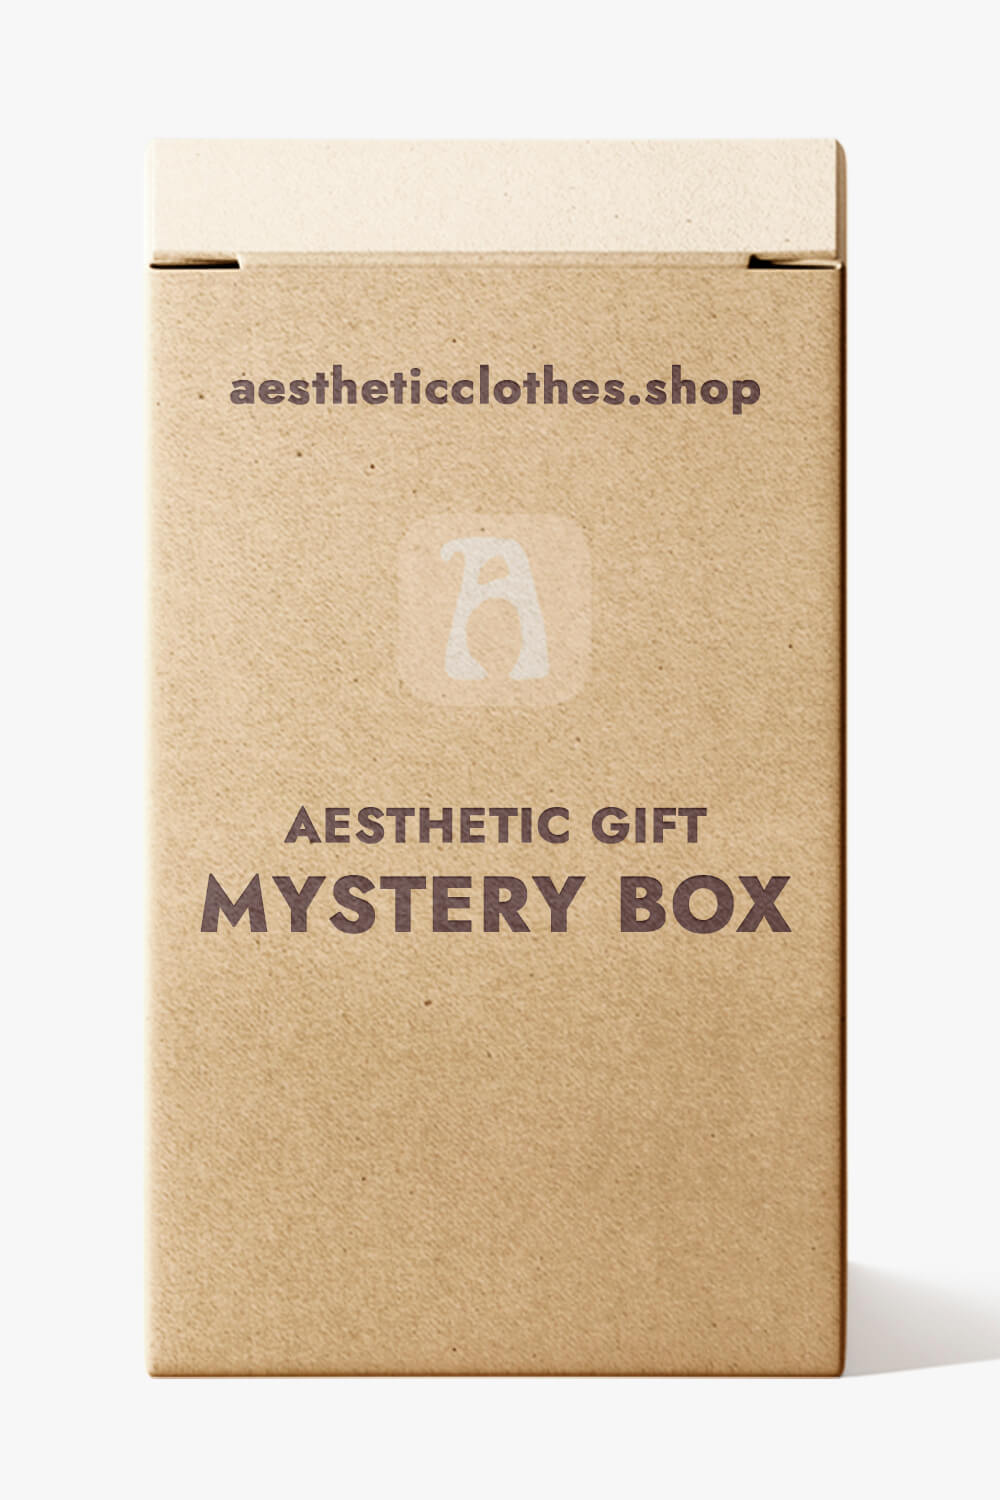 Aesthetic Gift Mystery Box - Aesthetic Clothes Shop